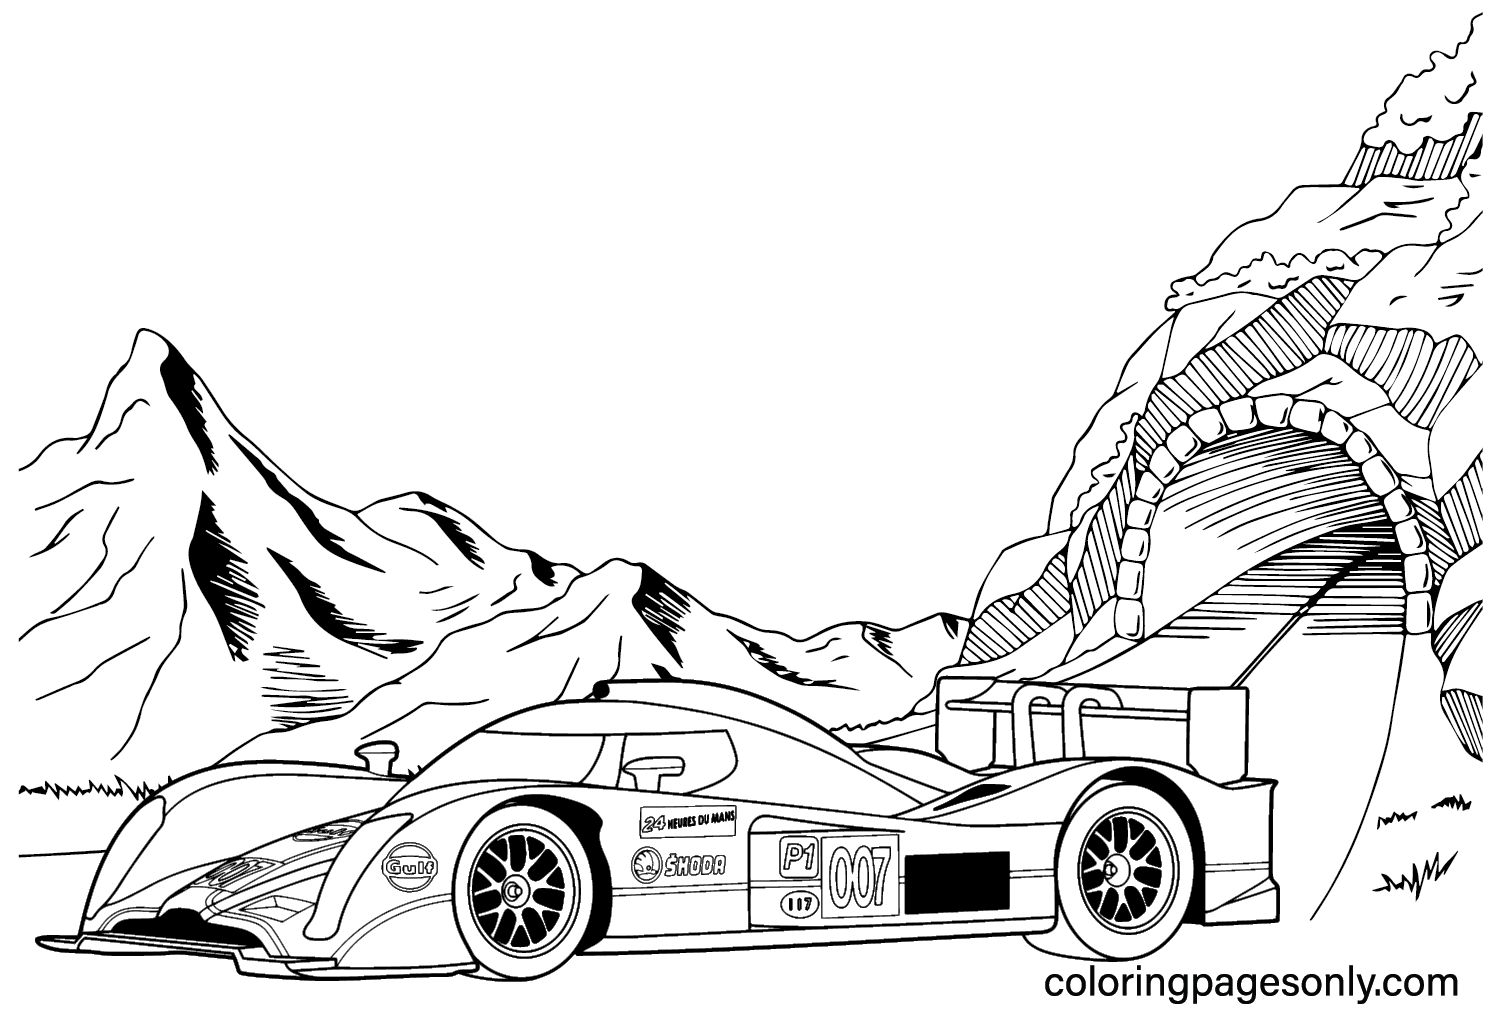 2010 Aston Martin DBR1 Coloring Page from Aston Martin